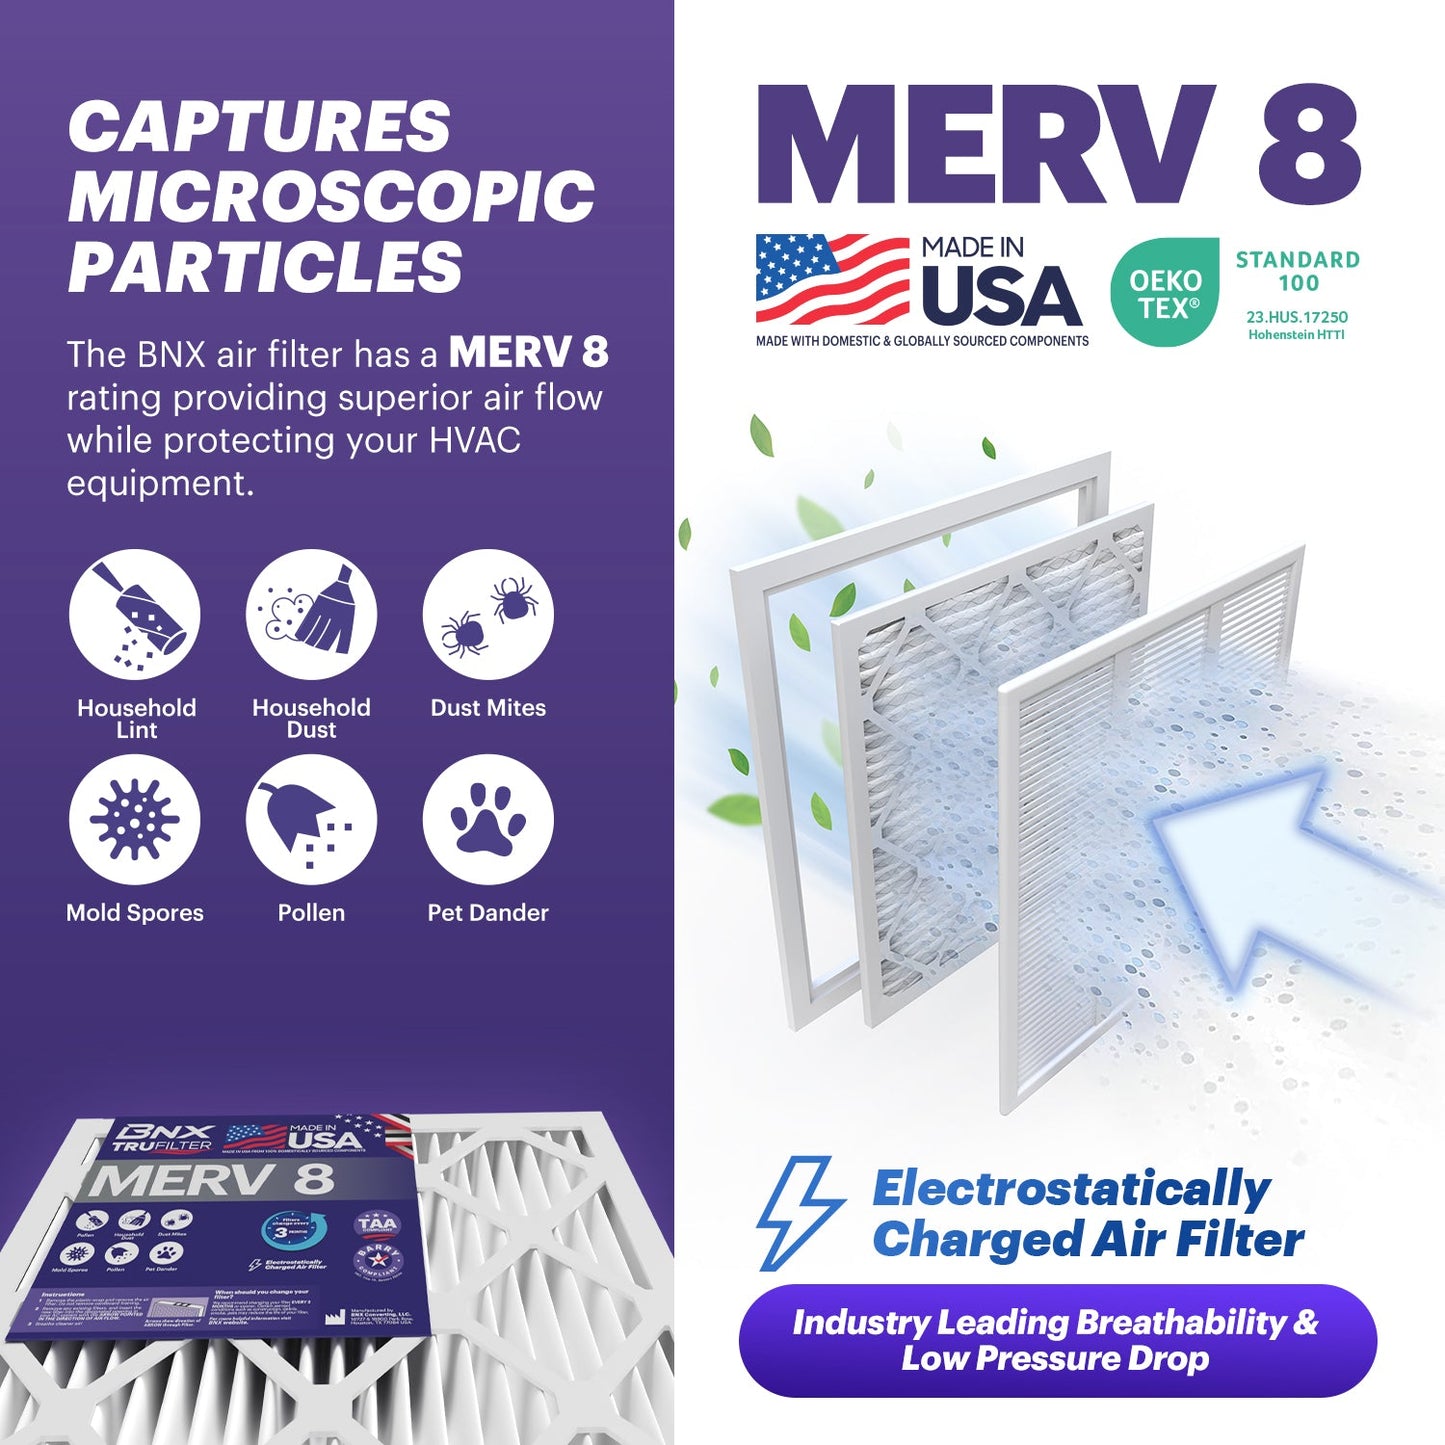 BNX TruFilter 18x20x1 MERV 8 Pleated Air Filter – Made in USA (6-Pack)